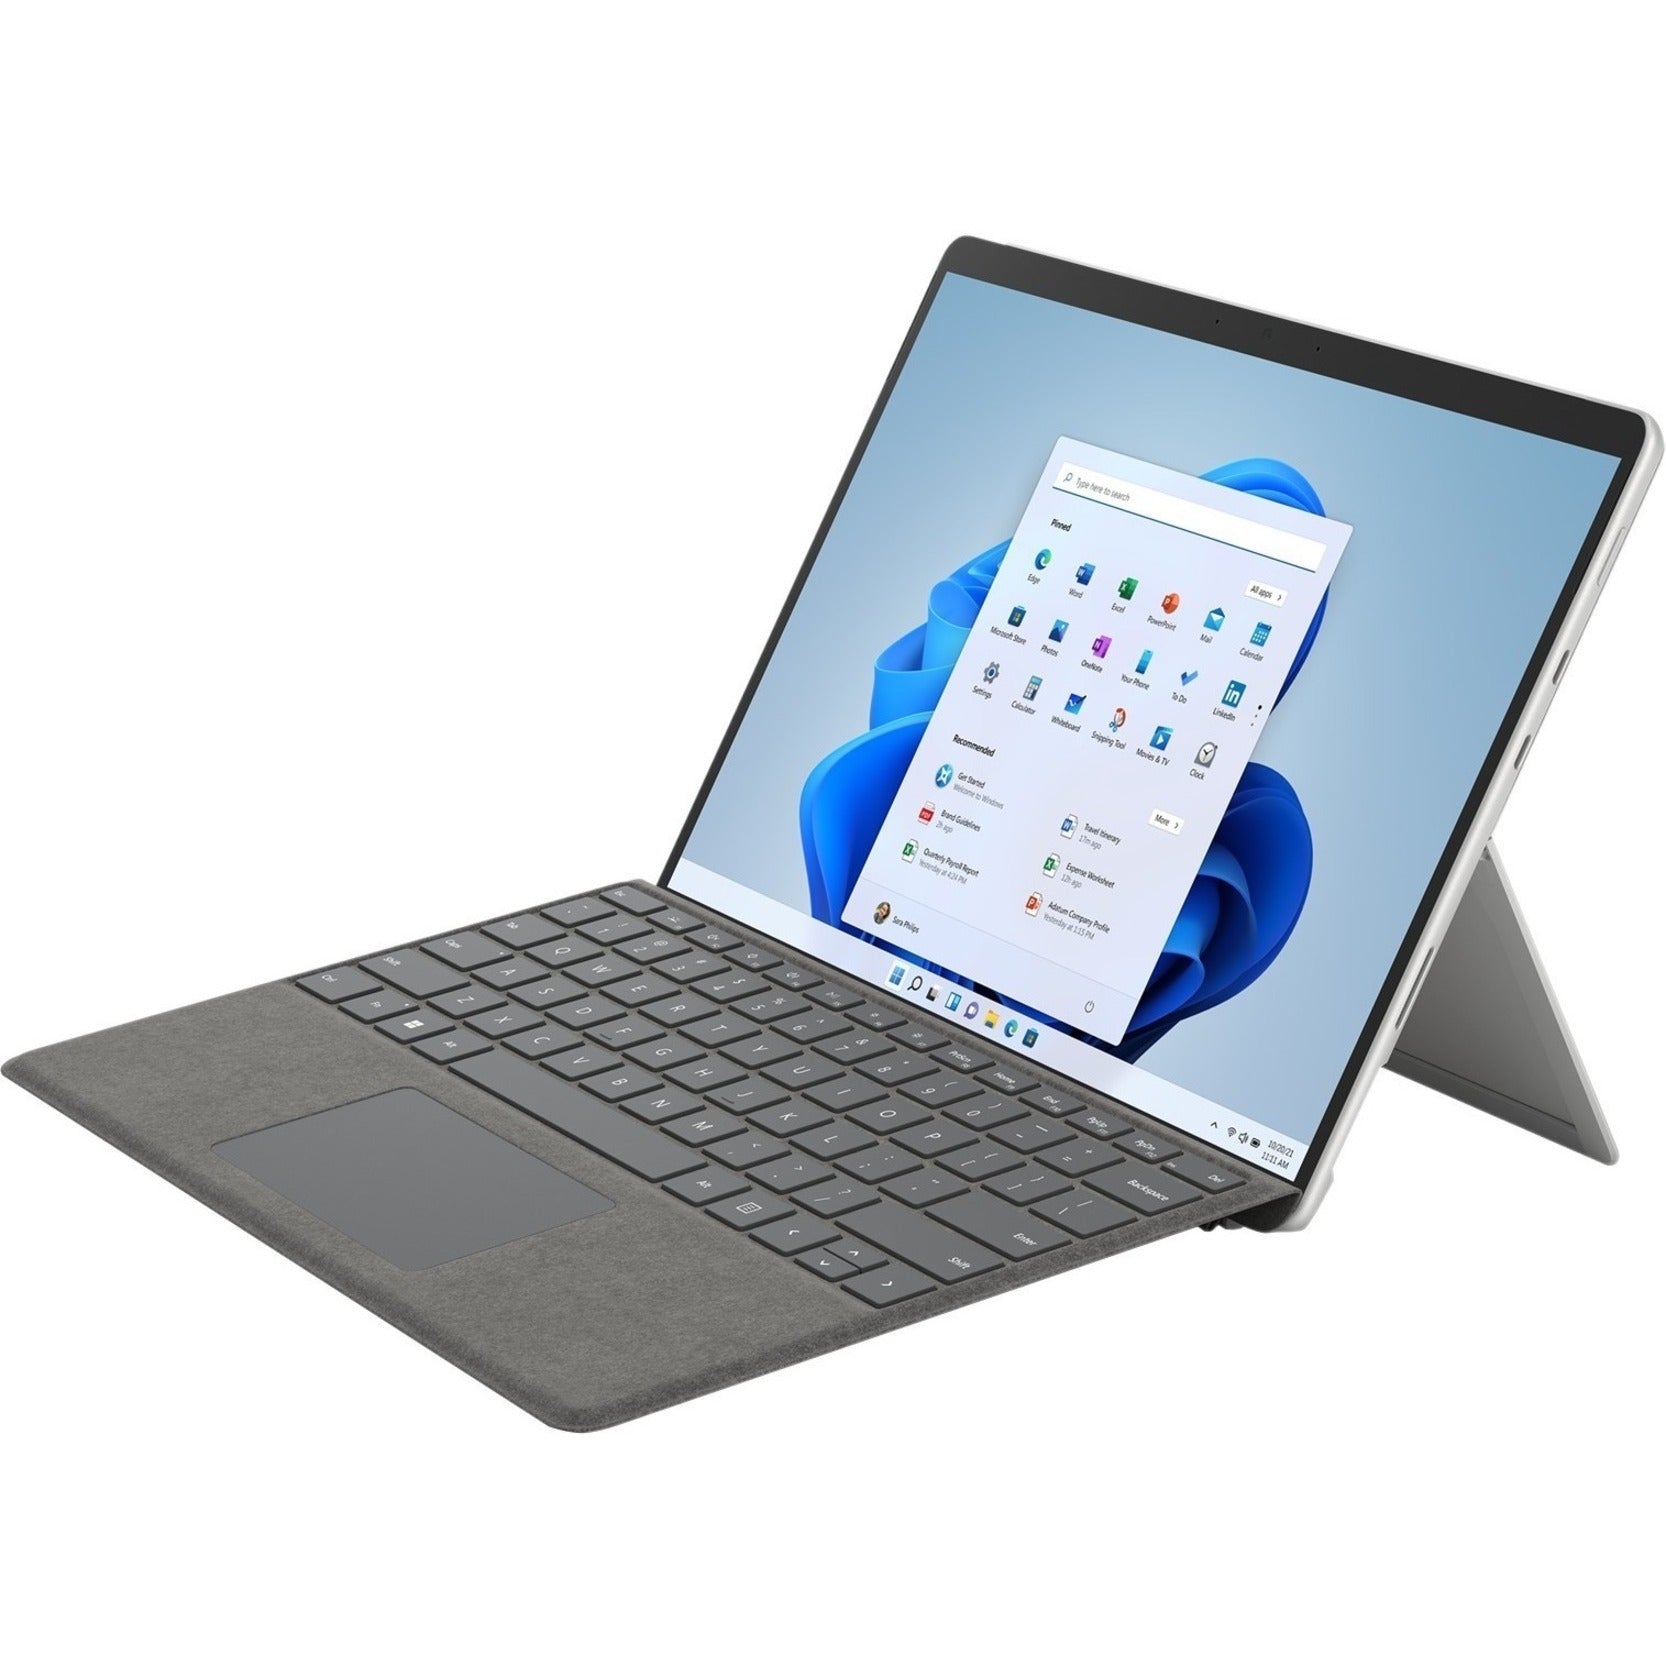 Microsoft SURFACE PROJECT AB 4 COMM TAA SC ENGLISH A1 PLATINUM (EBL-00003) [Discontinued]